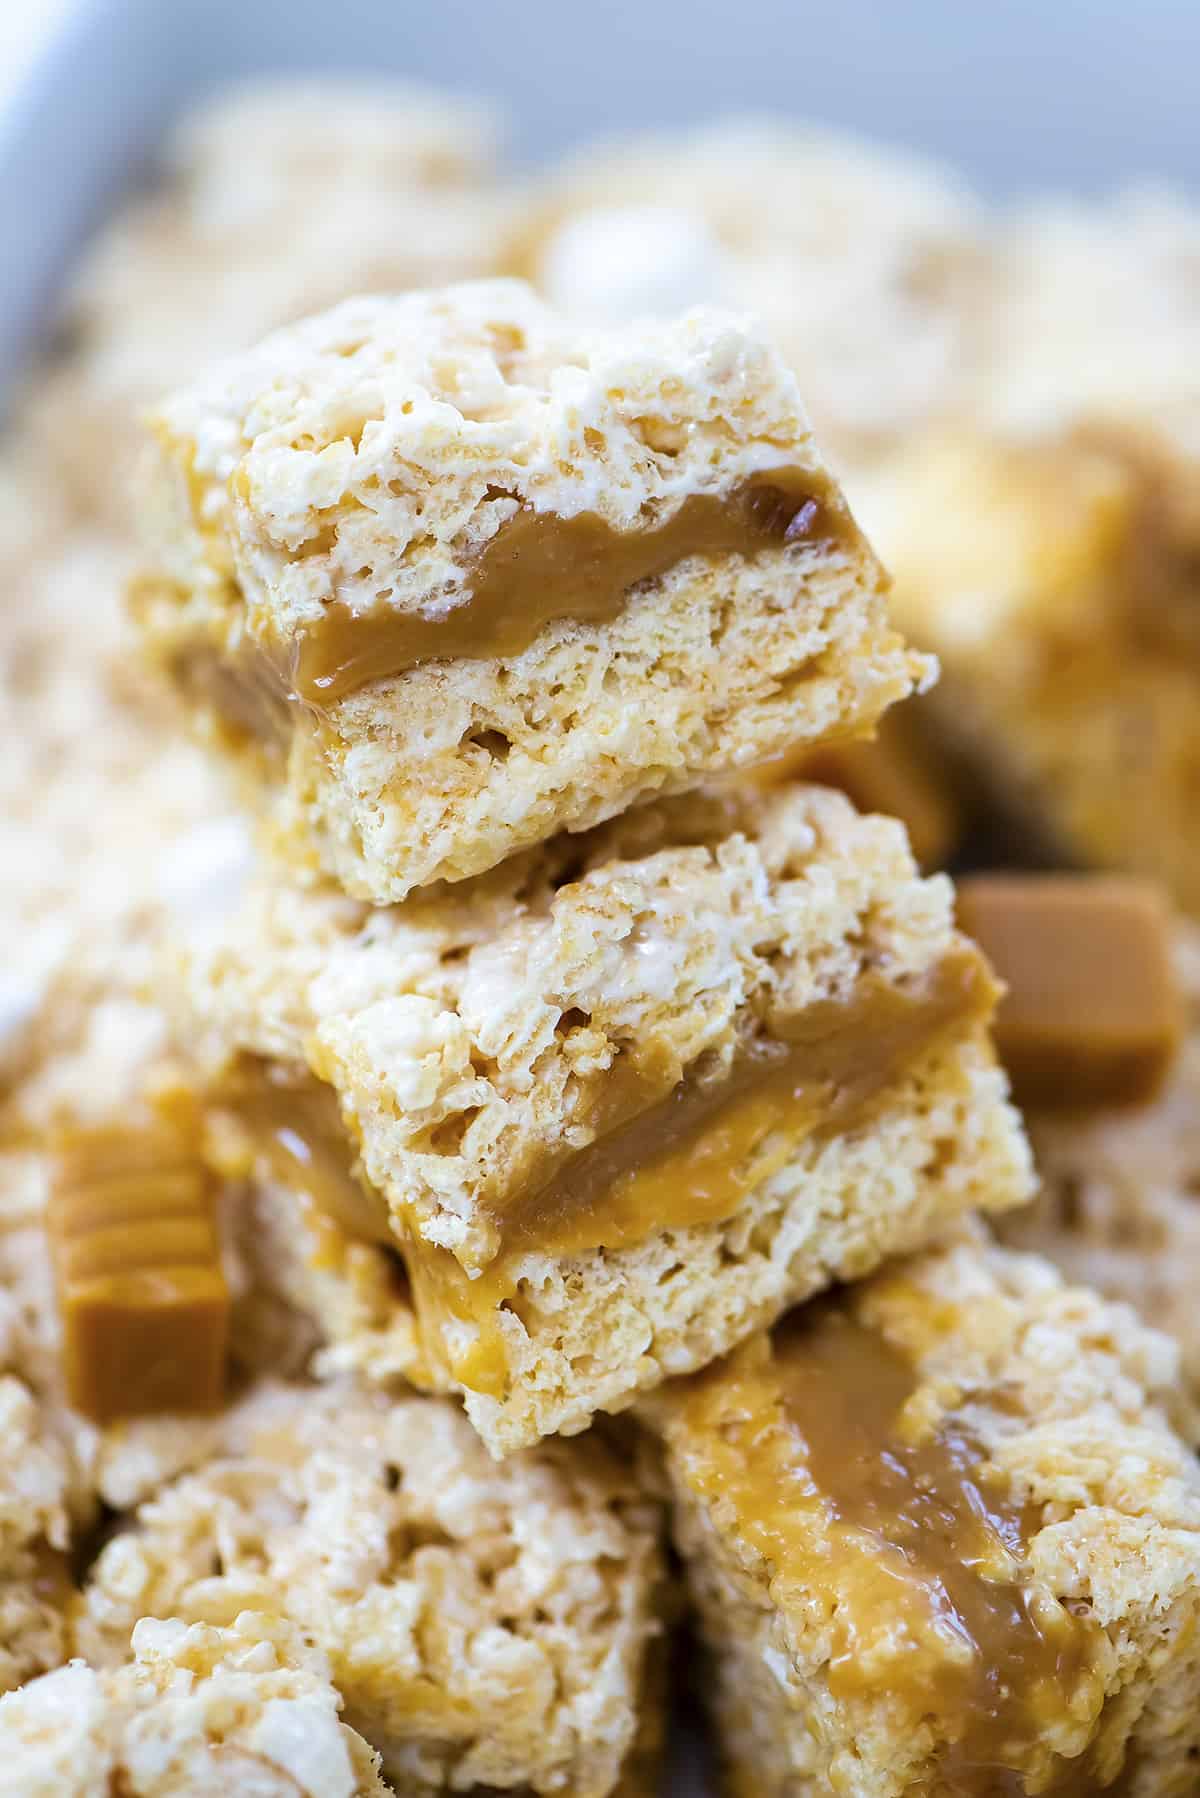 Rice krispies treats filled with caramel and stacked together.